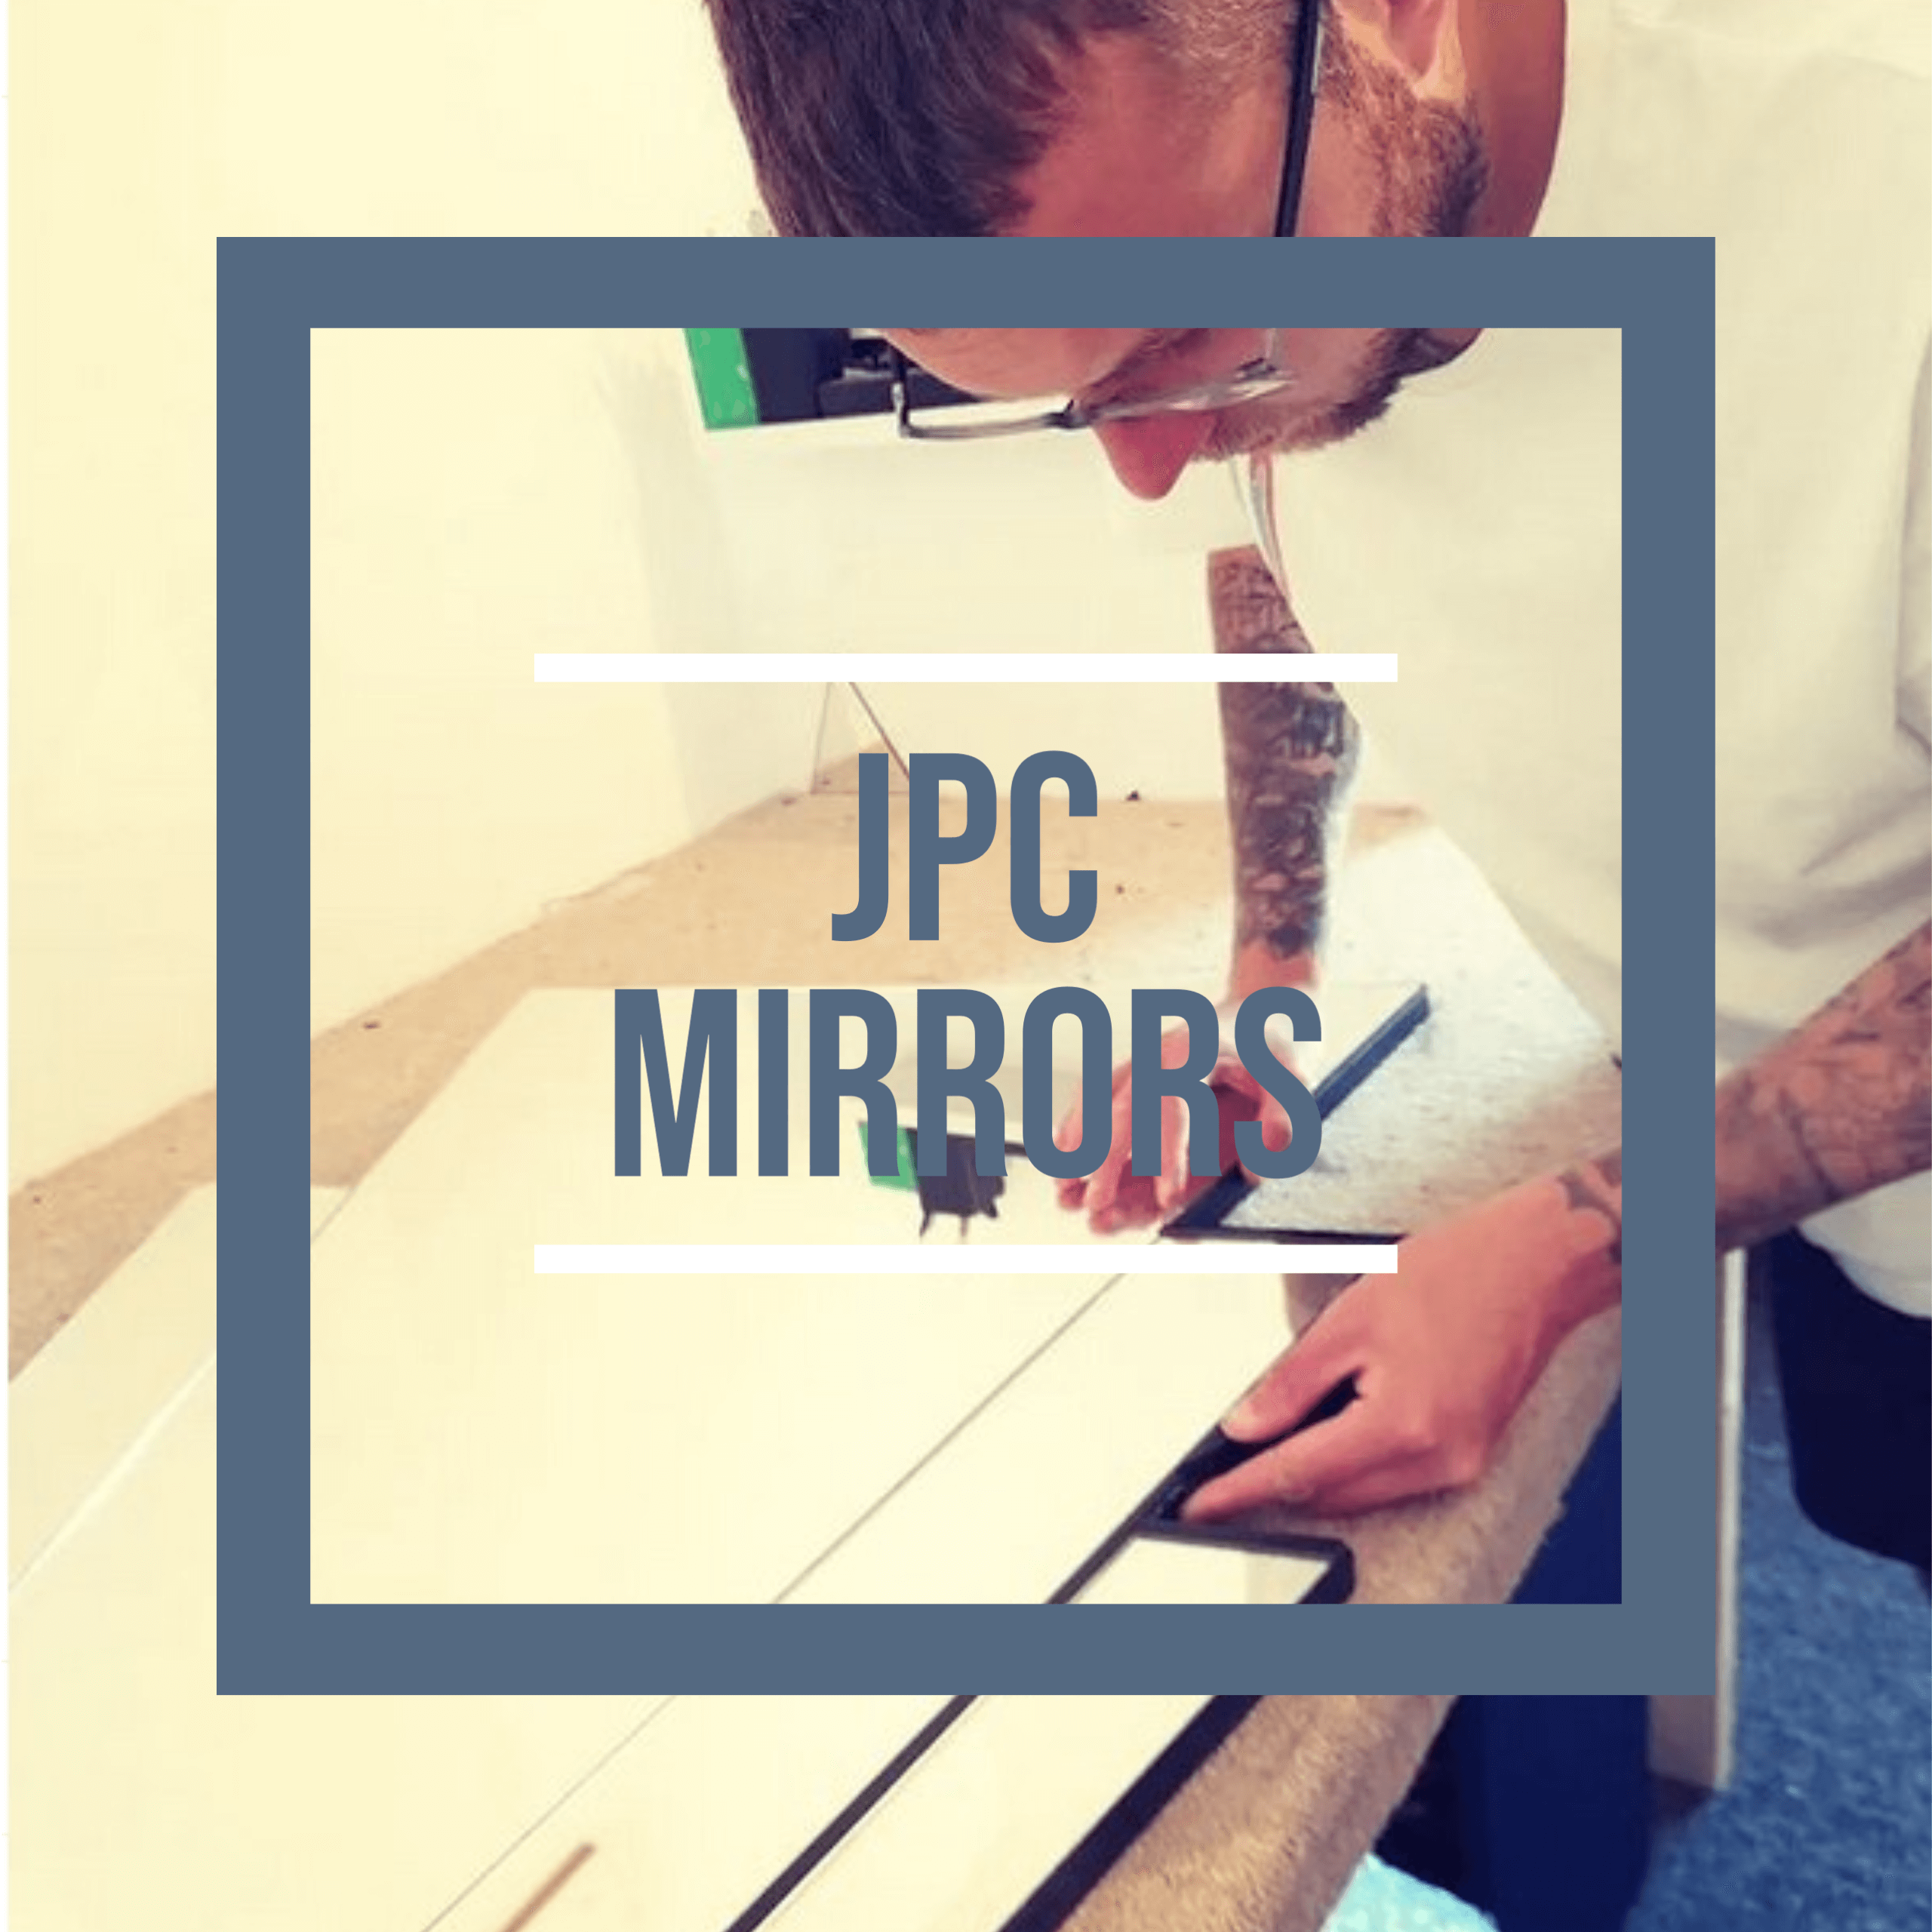 JPC Mirrors, Art Deco Mirror Specialist, Art Deco Mirror, Bespoke Art Deco Mirror, Art Deco Mirrors Made in England, UK Made and Designer of Art Deco Mirror, Mirrors, The Double W Art Deco Mirror